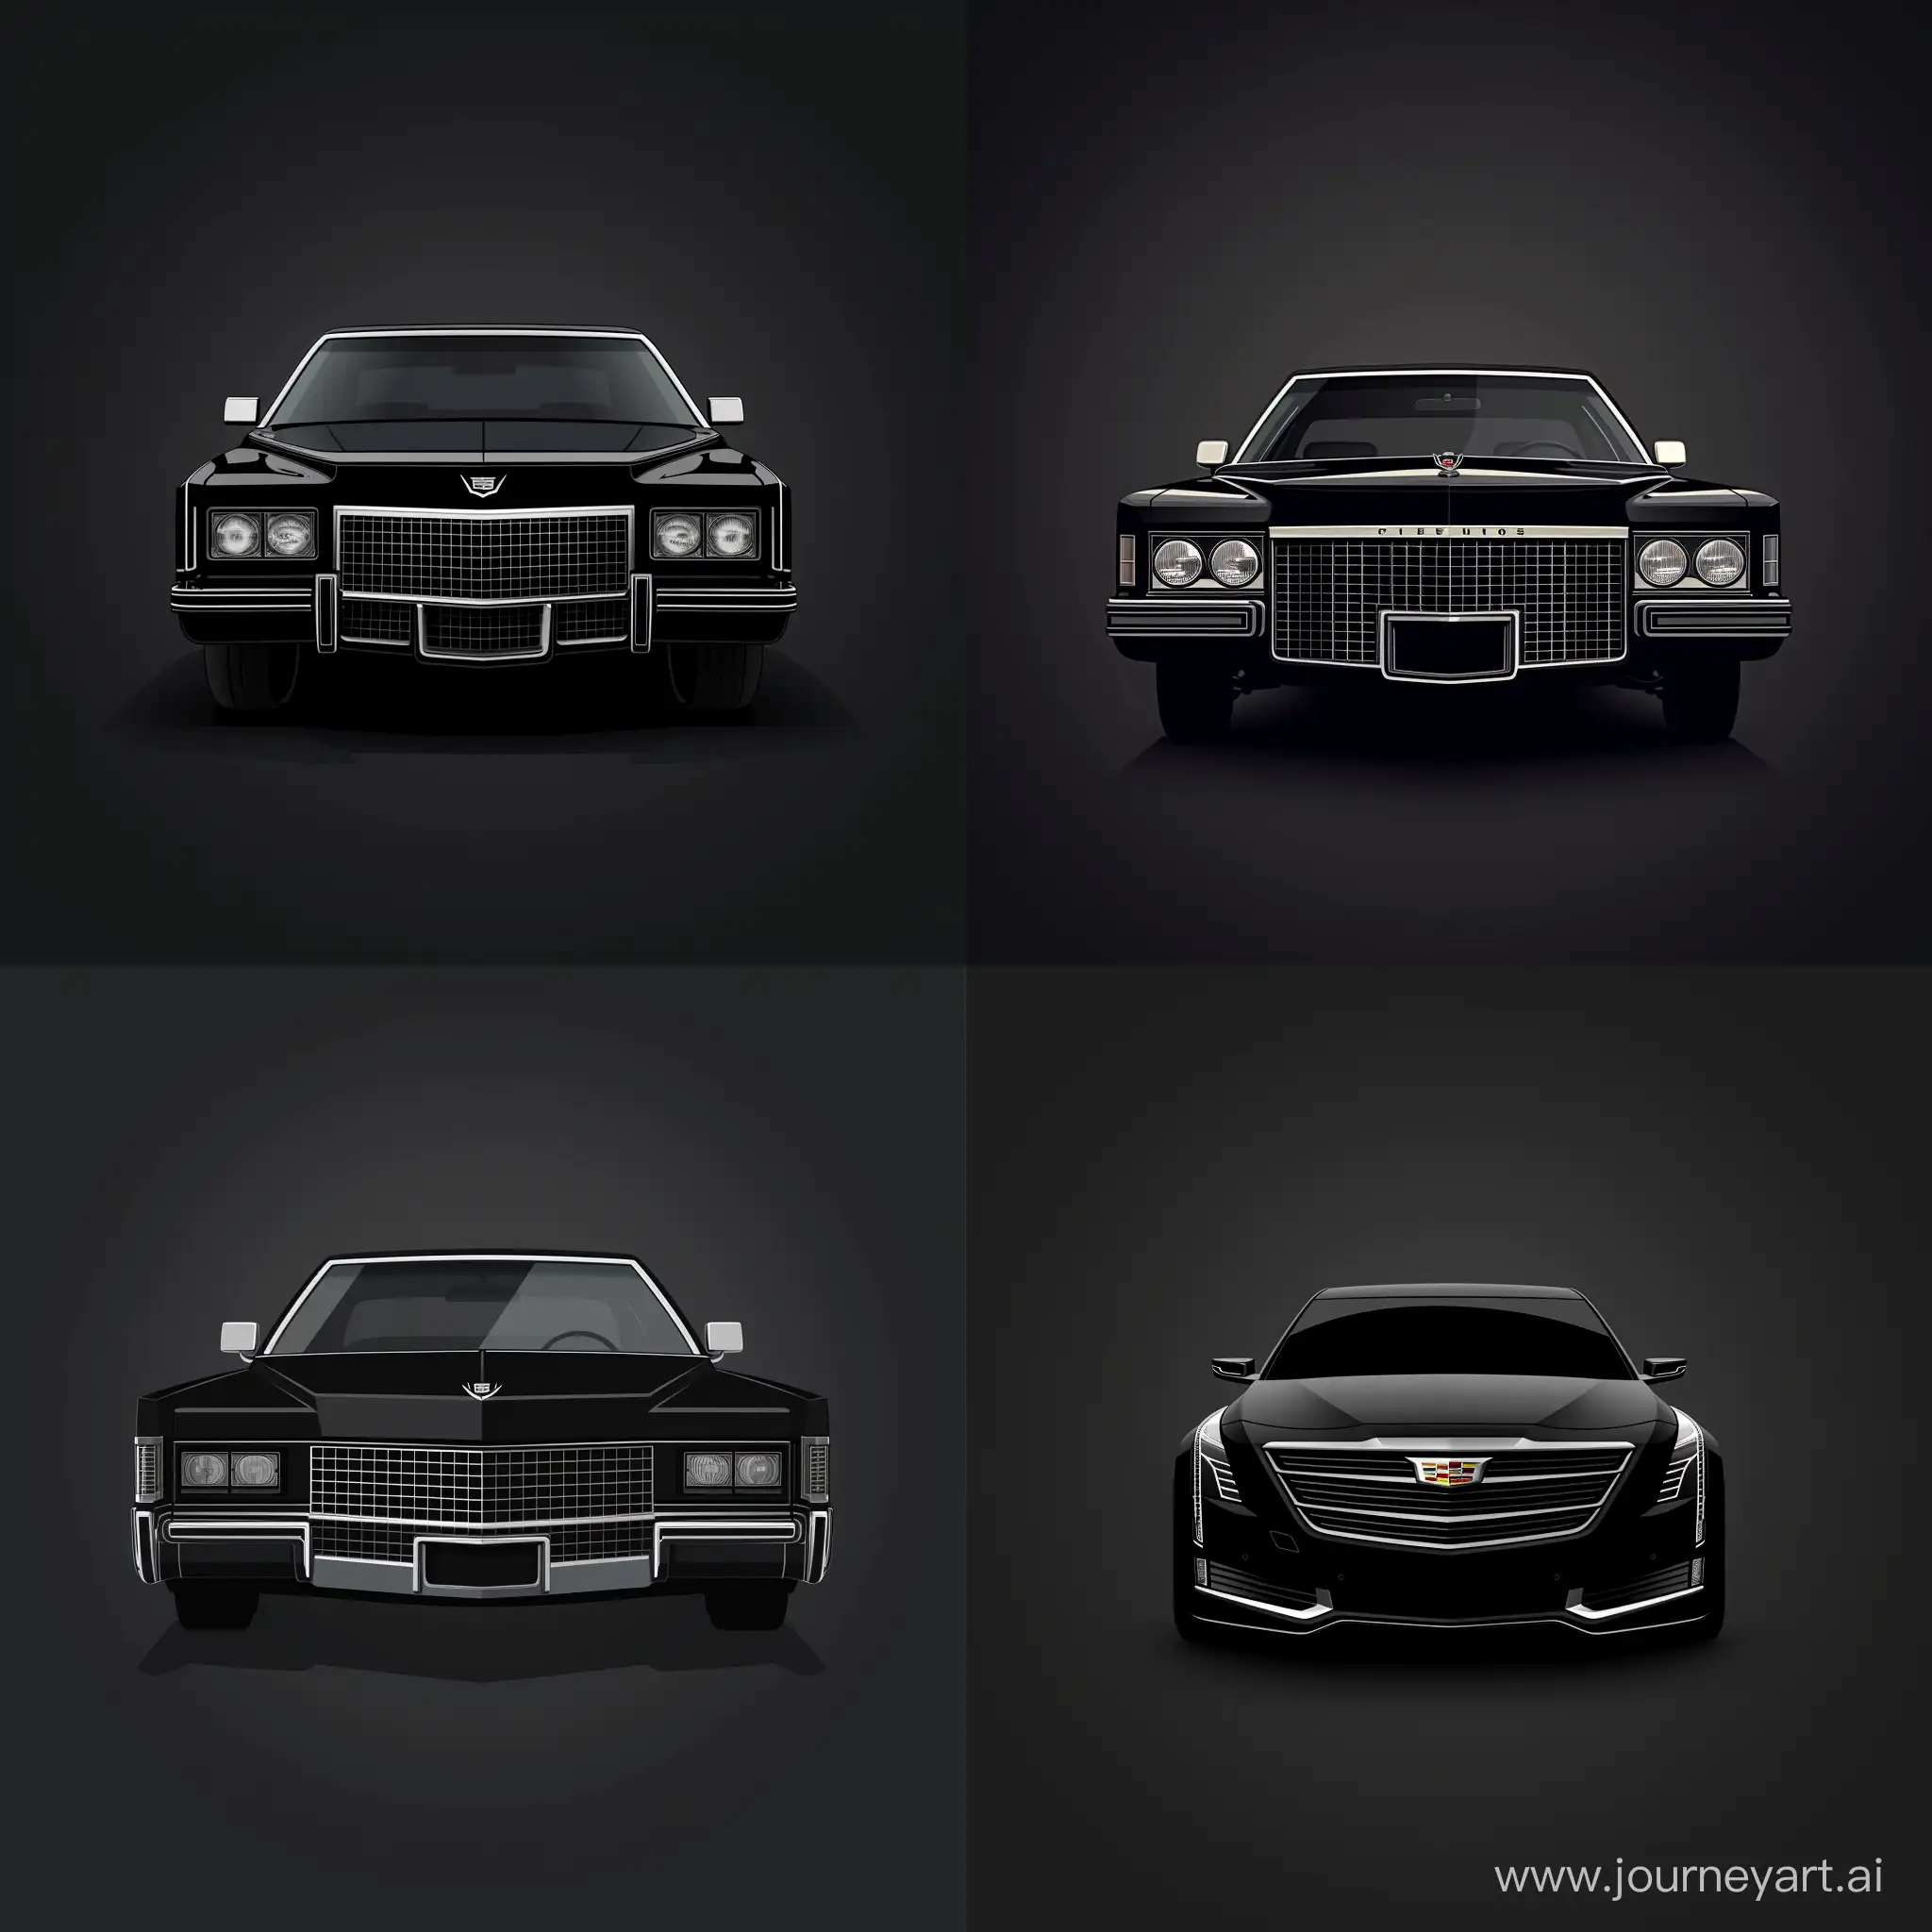  Minimalism 2D Illustration Car of Front View, Cadillac Fleetwood: Black Body Color, Simple Dark Background, Adobe Illustrator Software, High Precision